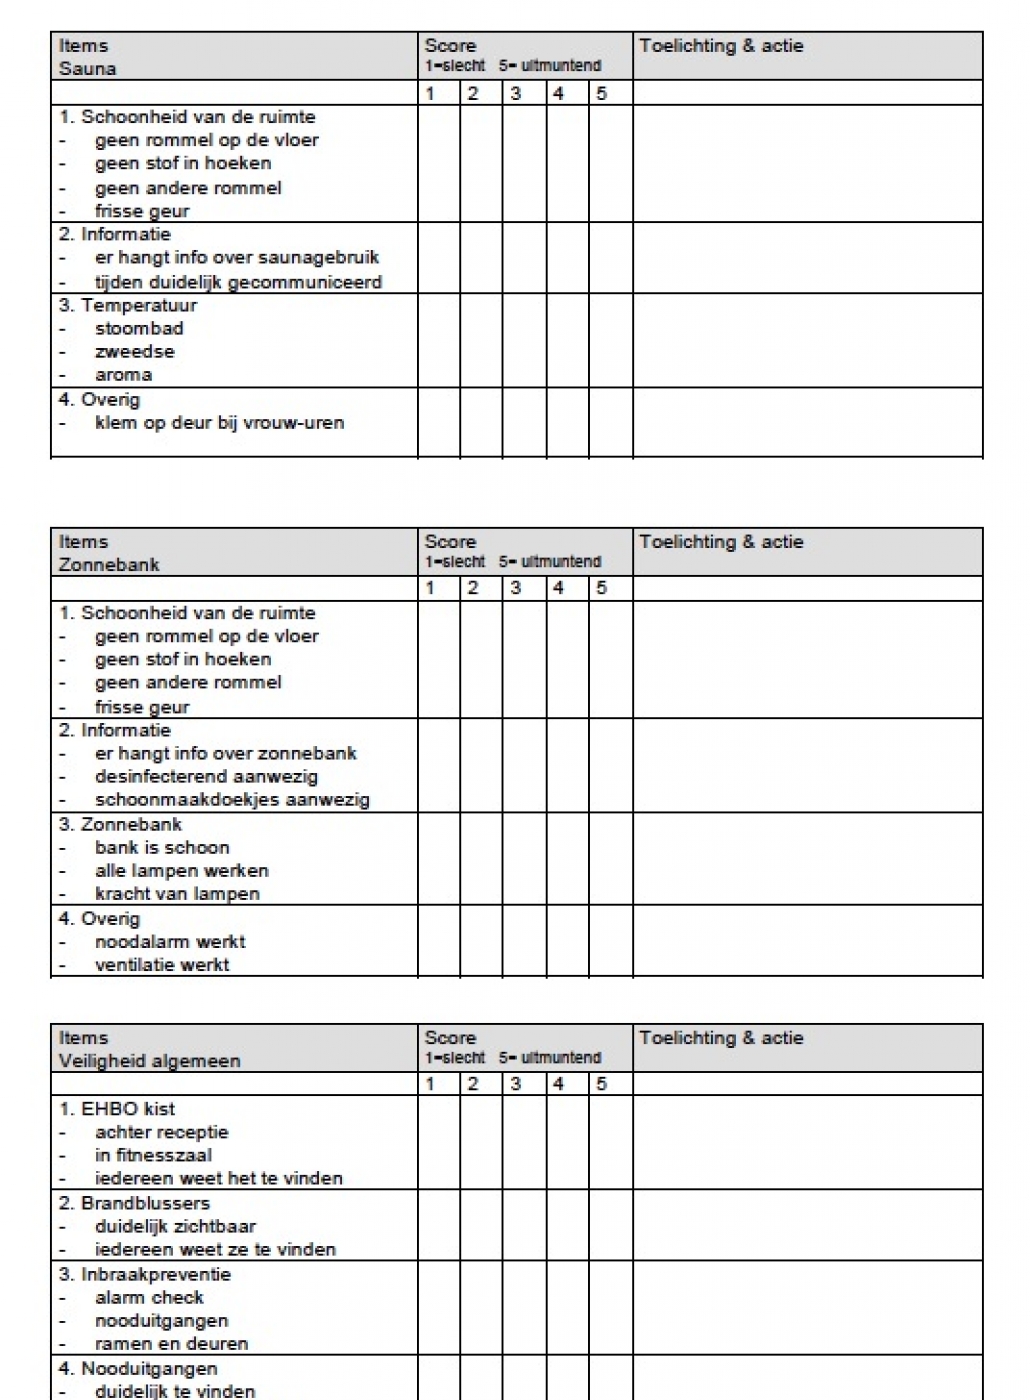 Checklist - controle fitnessclub facilitaire kwaliteit